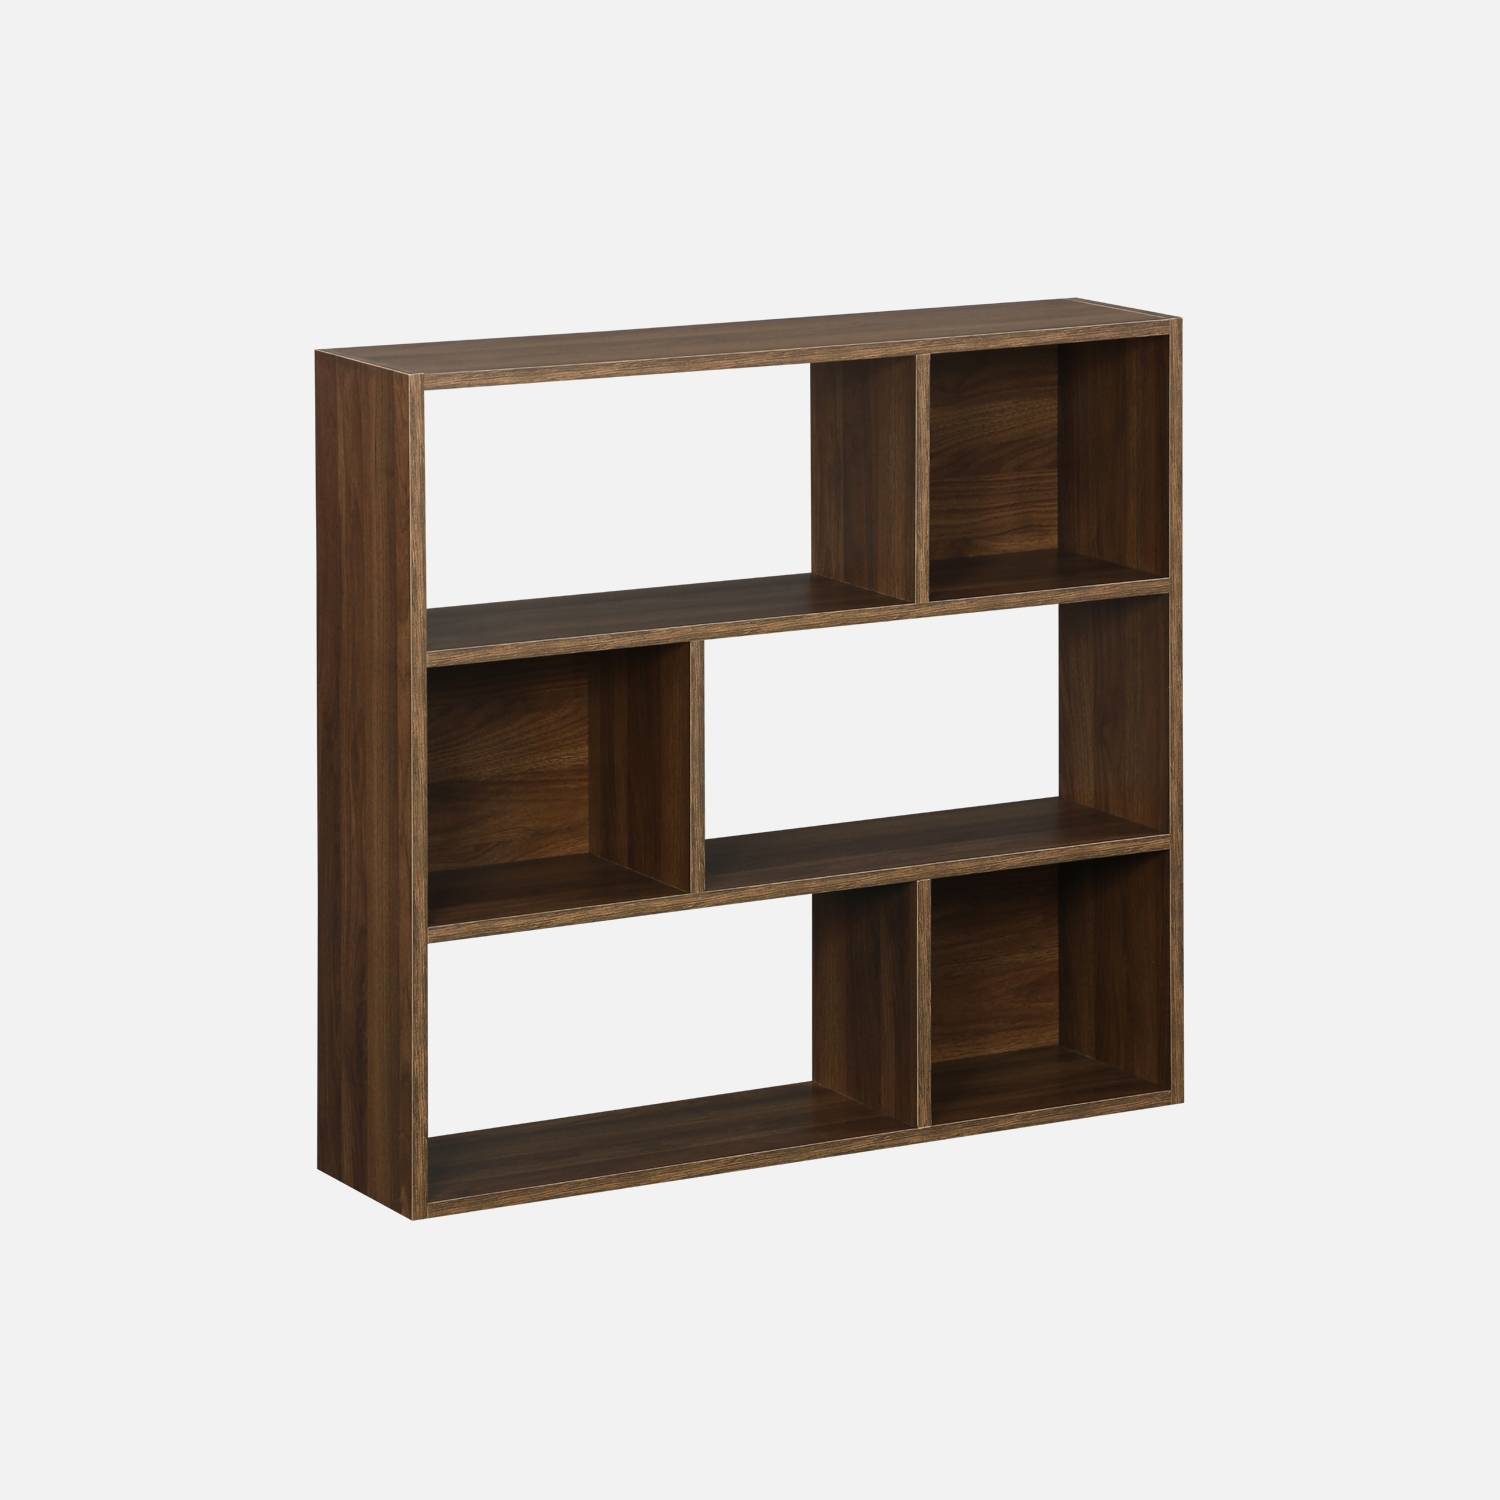 3-shelf bookcase with 6 compartments, wood